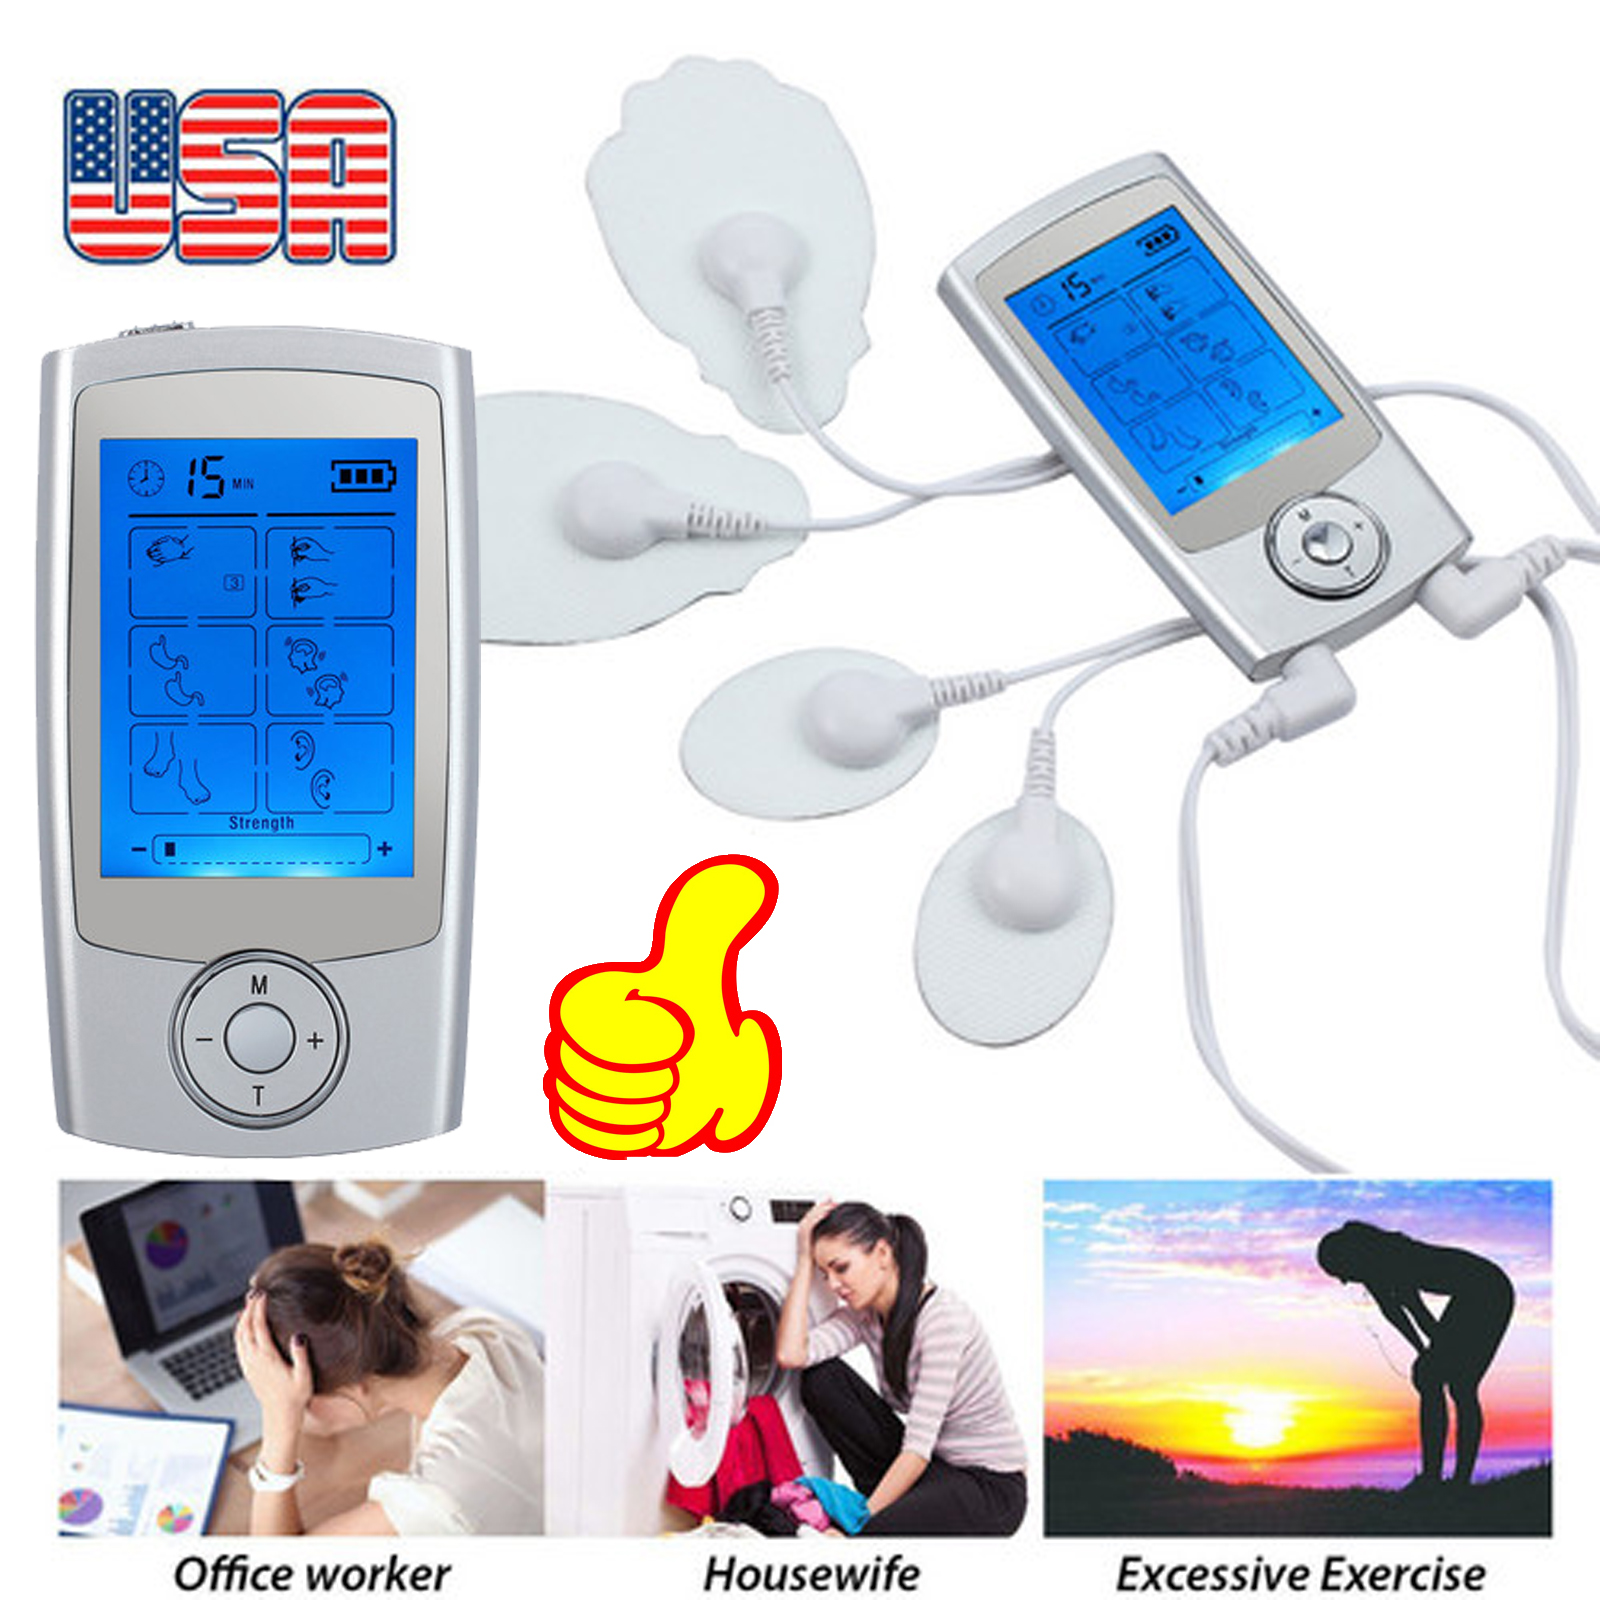 Details about 16Mode Tens Unit Digital Electronic Pulse Massager Full Body Therapy Pain Relief